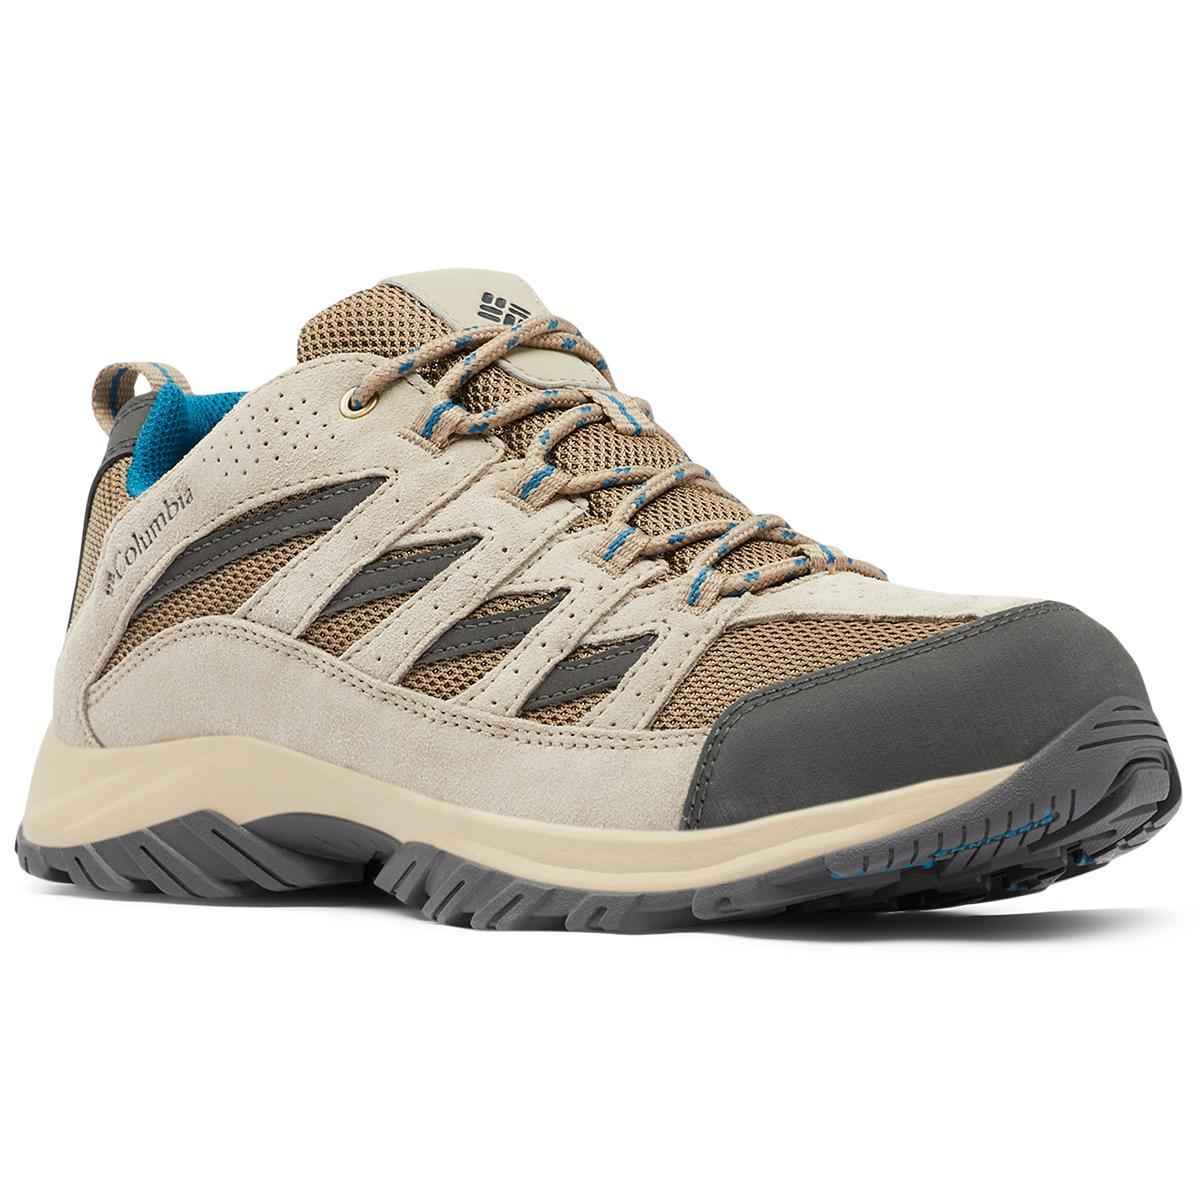 Columbia Womens Crestwood Red/Coppr Product Image